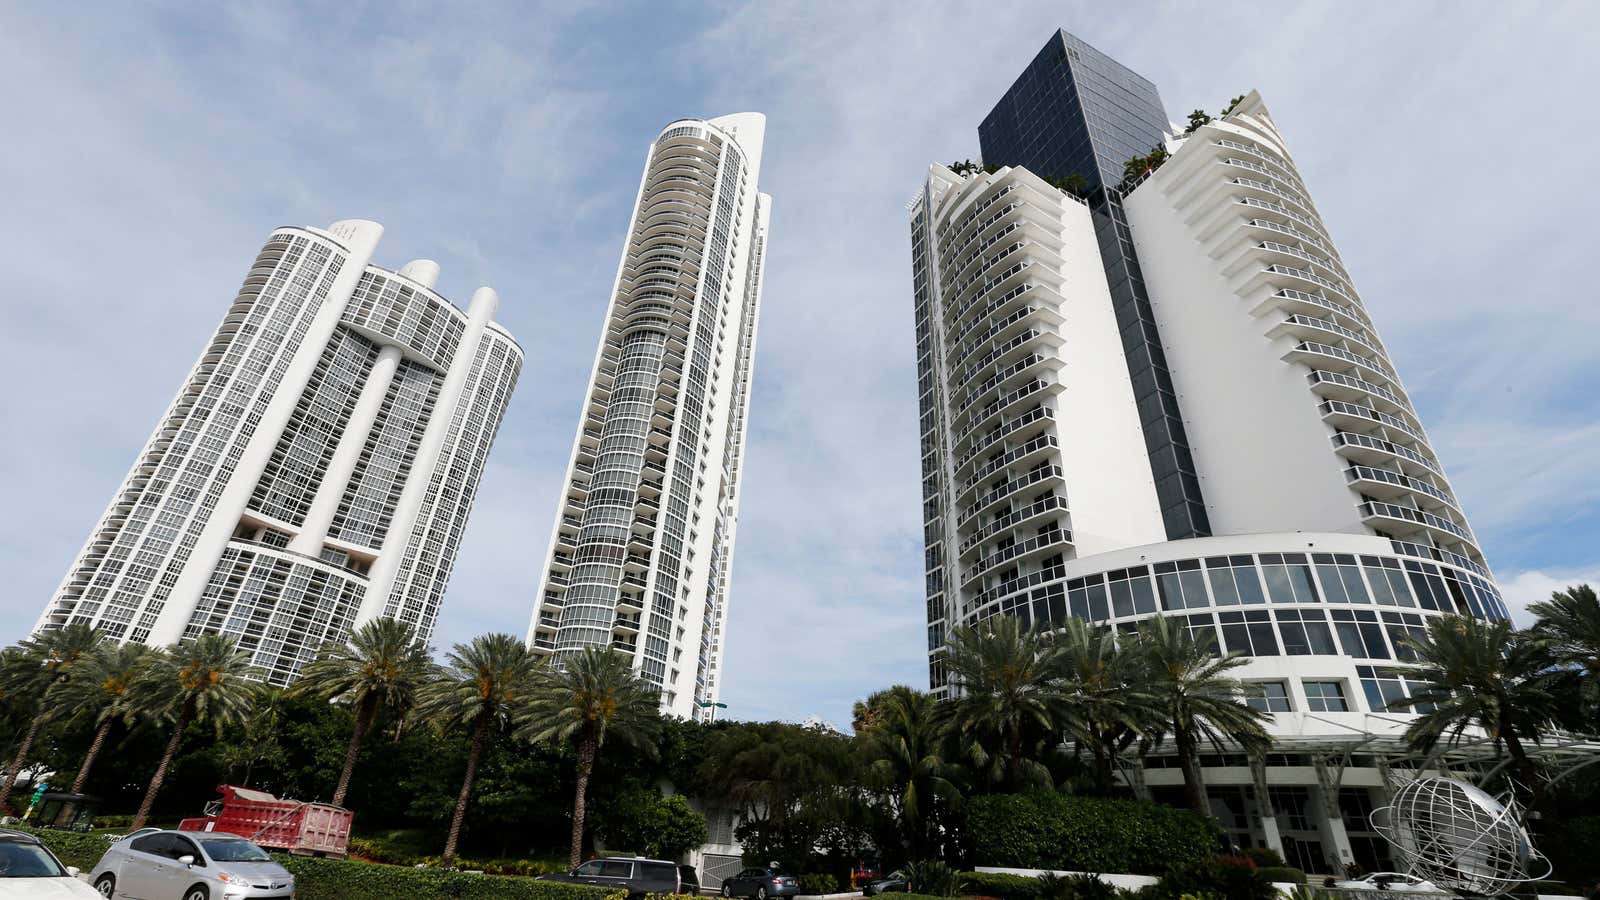 These Trump properties in Florida are known as “Little Moscow.”